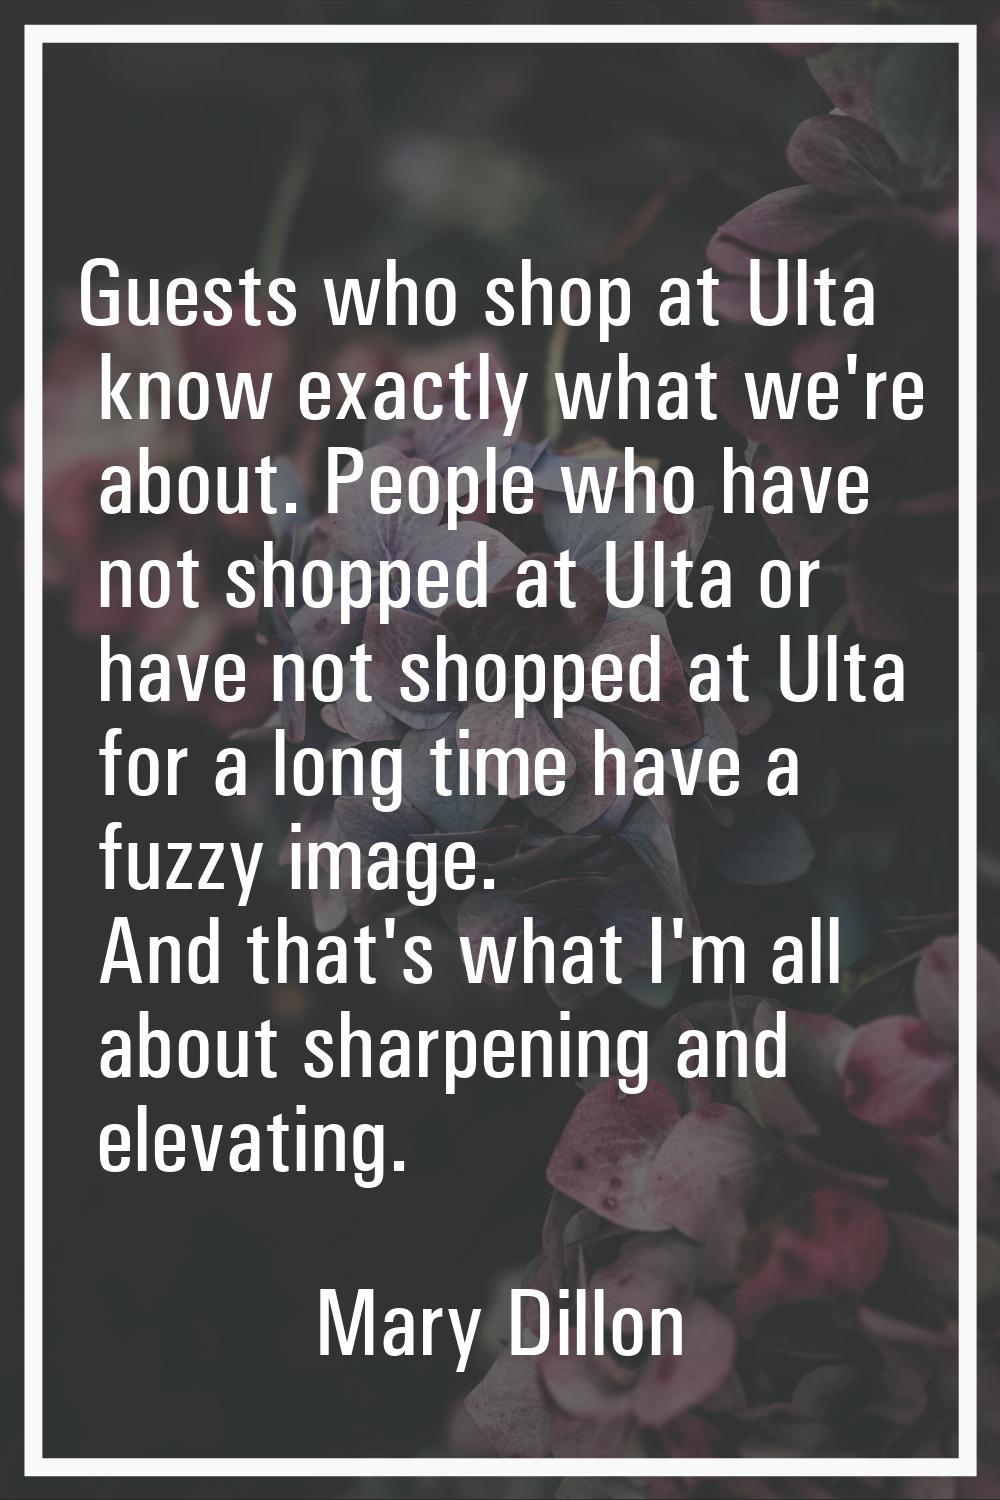 Guests who shop at Ulta know exactly what we're about. People who have not shopped at Ulta or have 